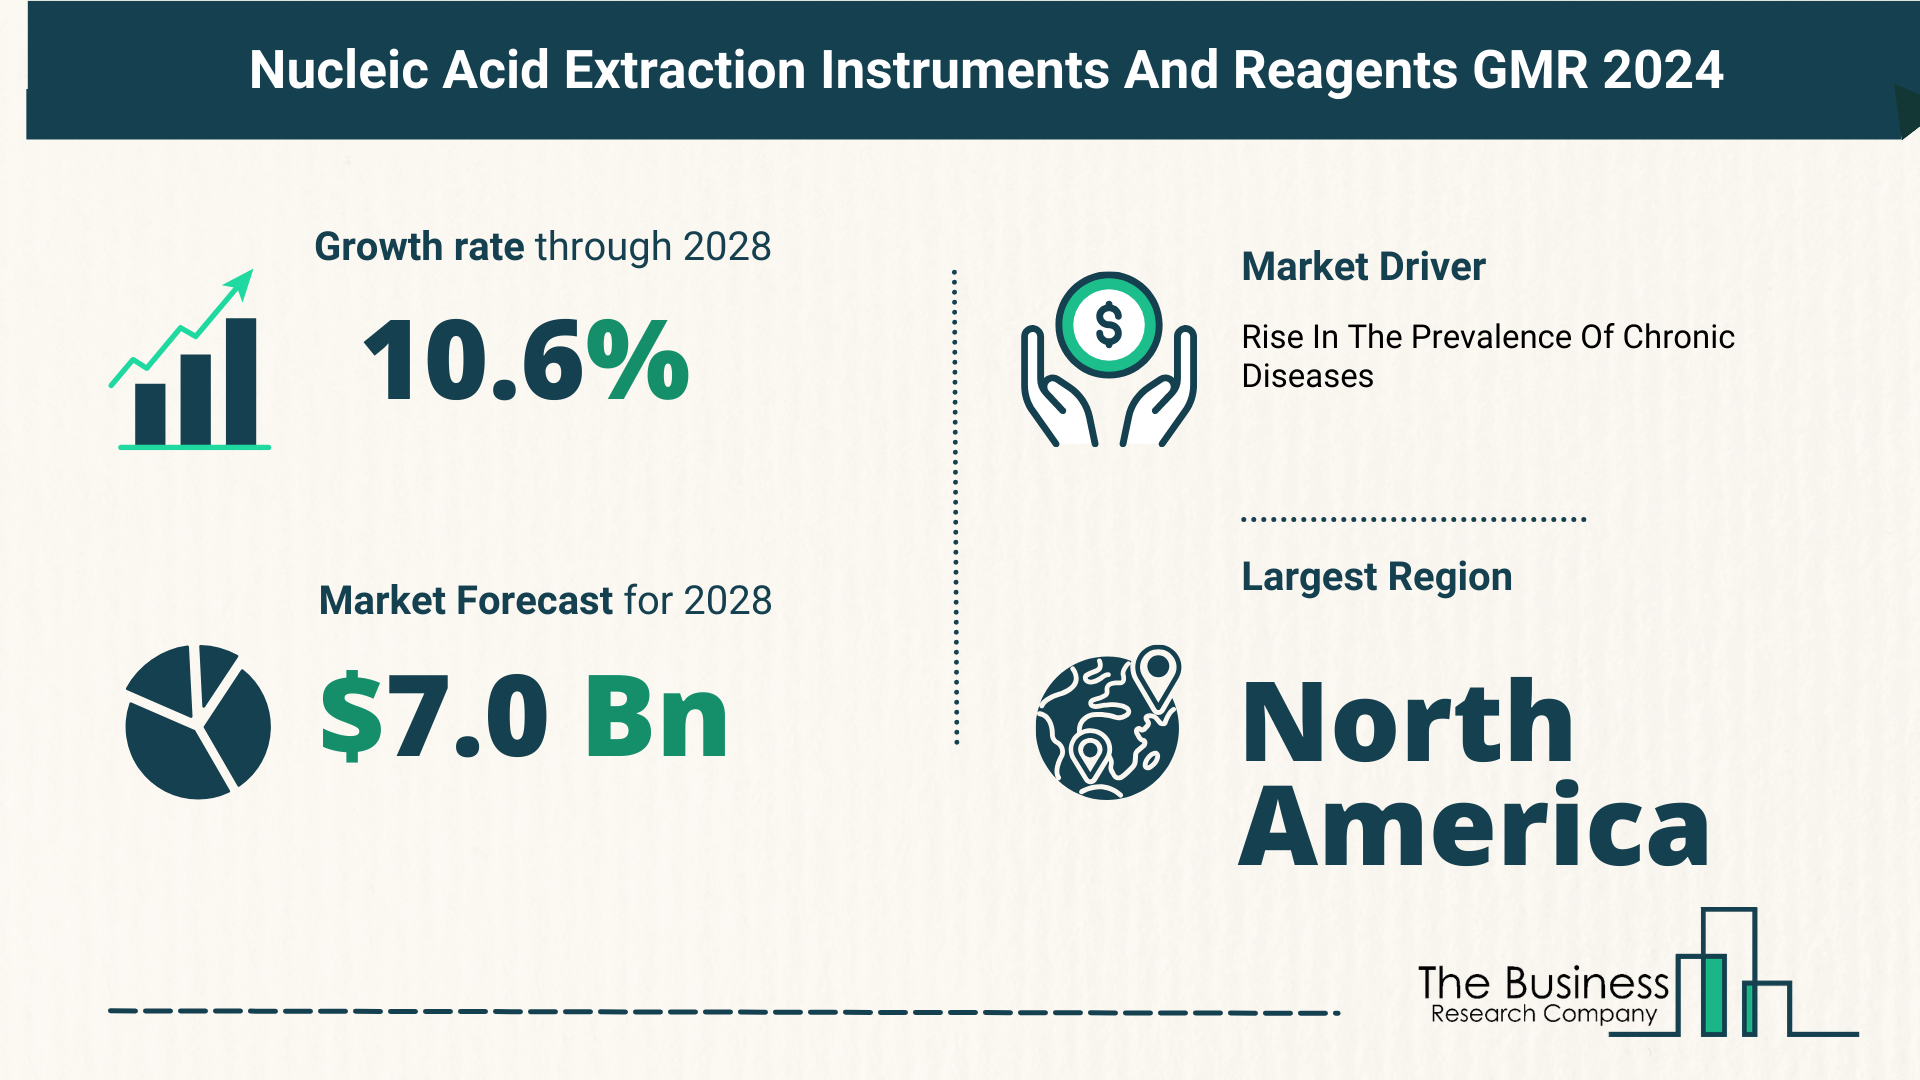 Global Nucleic Acid Extraction Instruments And Reagents Market